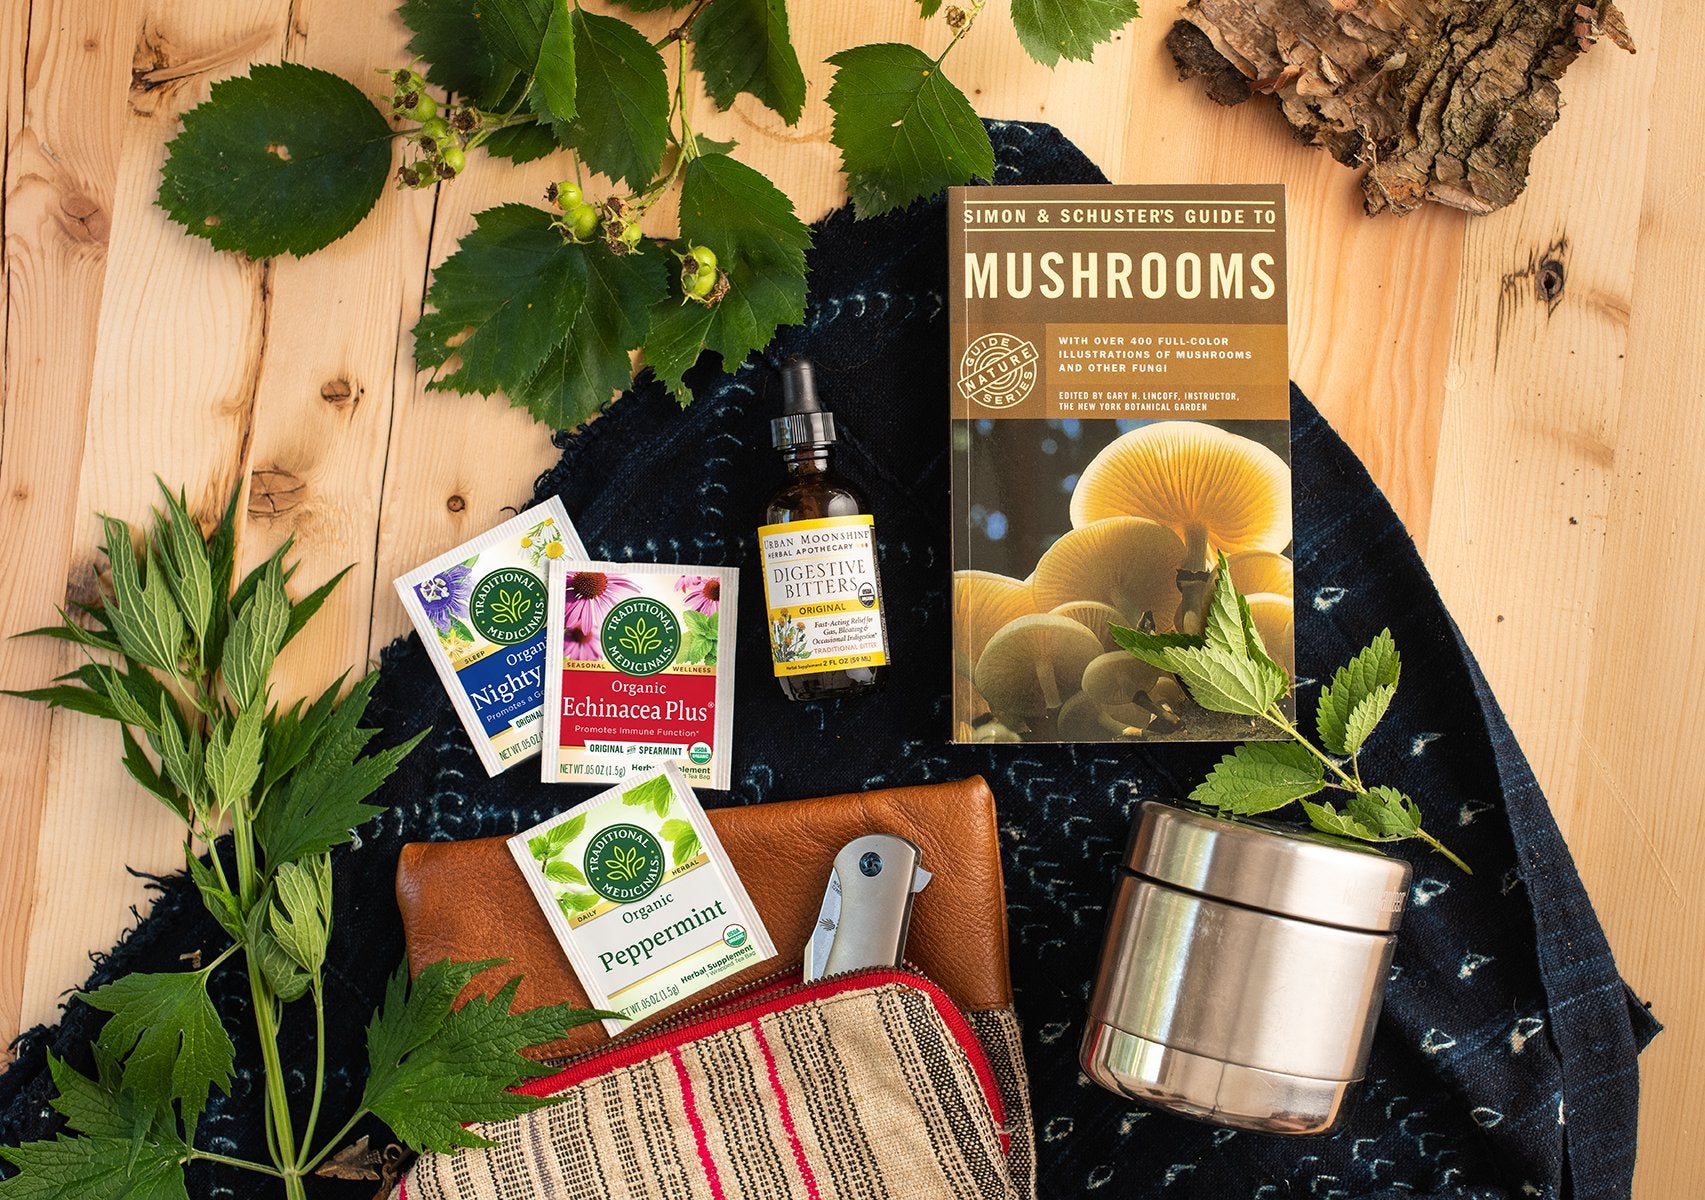 Herbal essentials for camping products